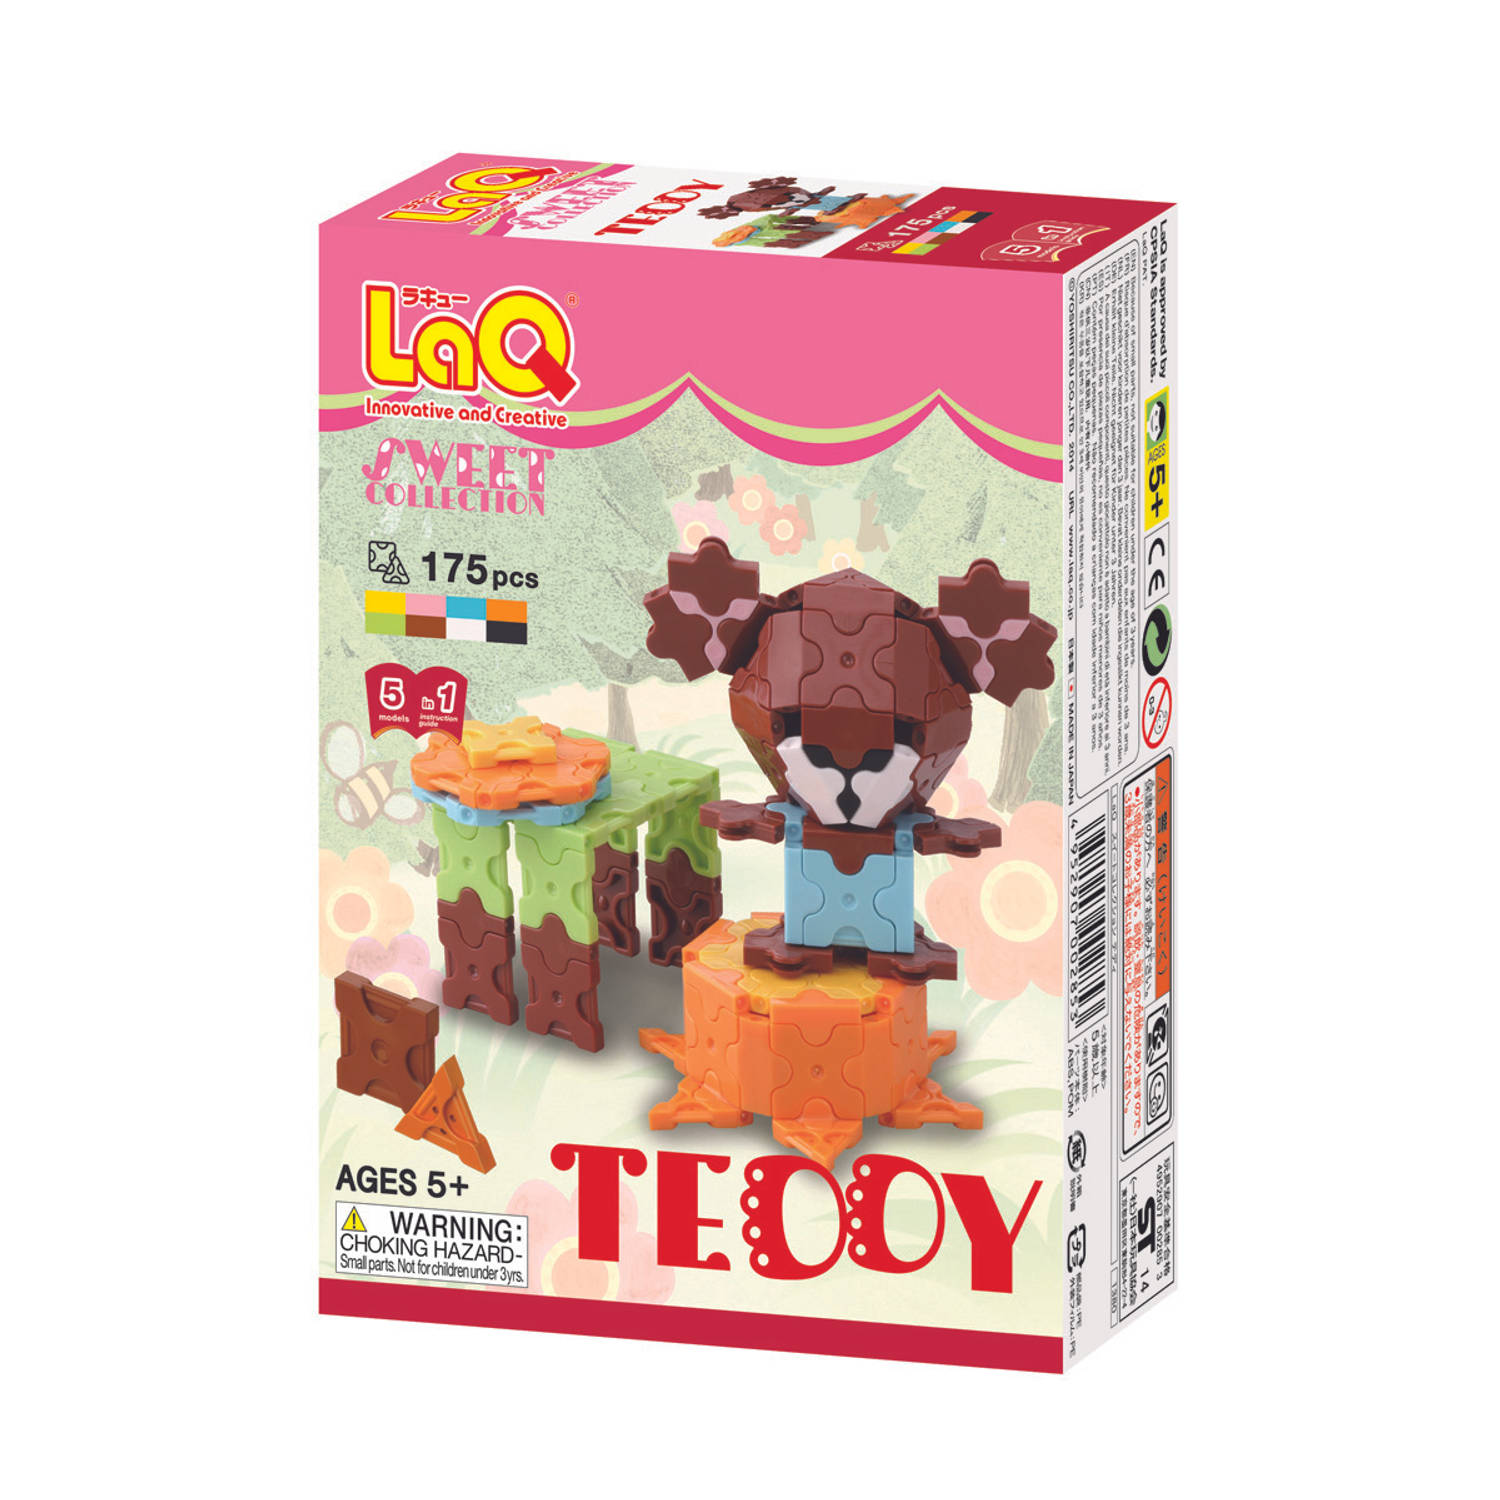 LaQ Sweet Collection Teddy